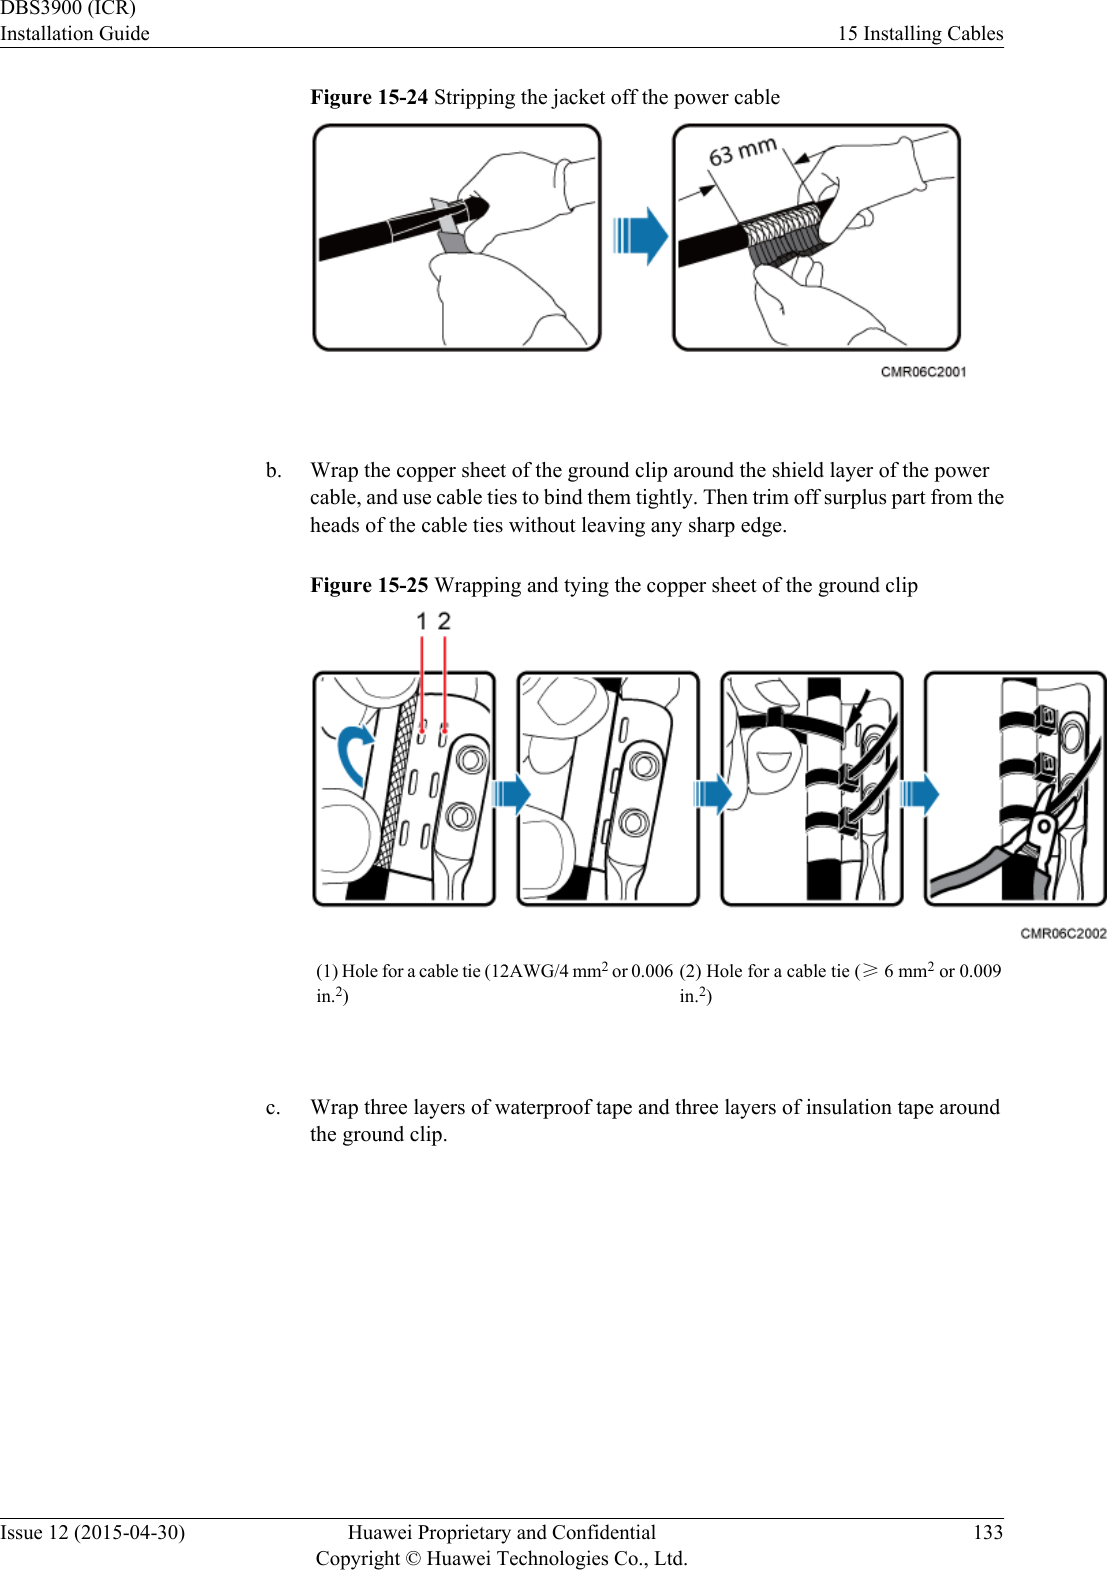 Figure 15-24 Stripping the jacket off the power cable b. Wrap the copper sheet of the ground clip around the shield layer of the powercable, and use cable ties to bind them tightly. Then trim off surplus part from theheads of the cable ties without leaving any sharp edge.Figure 15-25 Wrapping and tying the copper sheet of the ground clip(1) Hole for a cable tie (12AWG/4 mm2 or 0.006in.2)(2) Hole for a cable tie (≥ 6 mm2 or 0.009in.2) c. Wrap three layers of waterproof tape and three layers of insulation tape aroundthe ground clip.DBS3900 (ICR)Installation Guide 15 Installing CablesIssue 12 (2015-04-30) Huawei Proprietary and ConfidentialCopyright © Huawei Technologies Co., Ltd.133